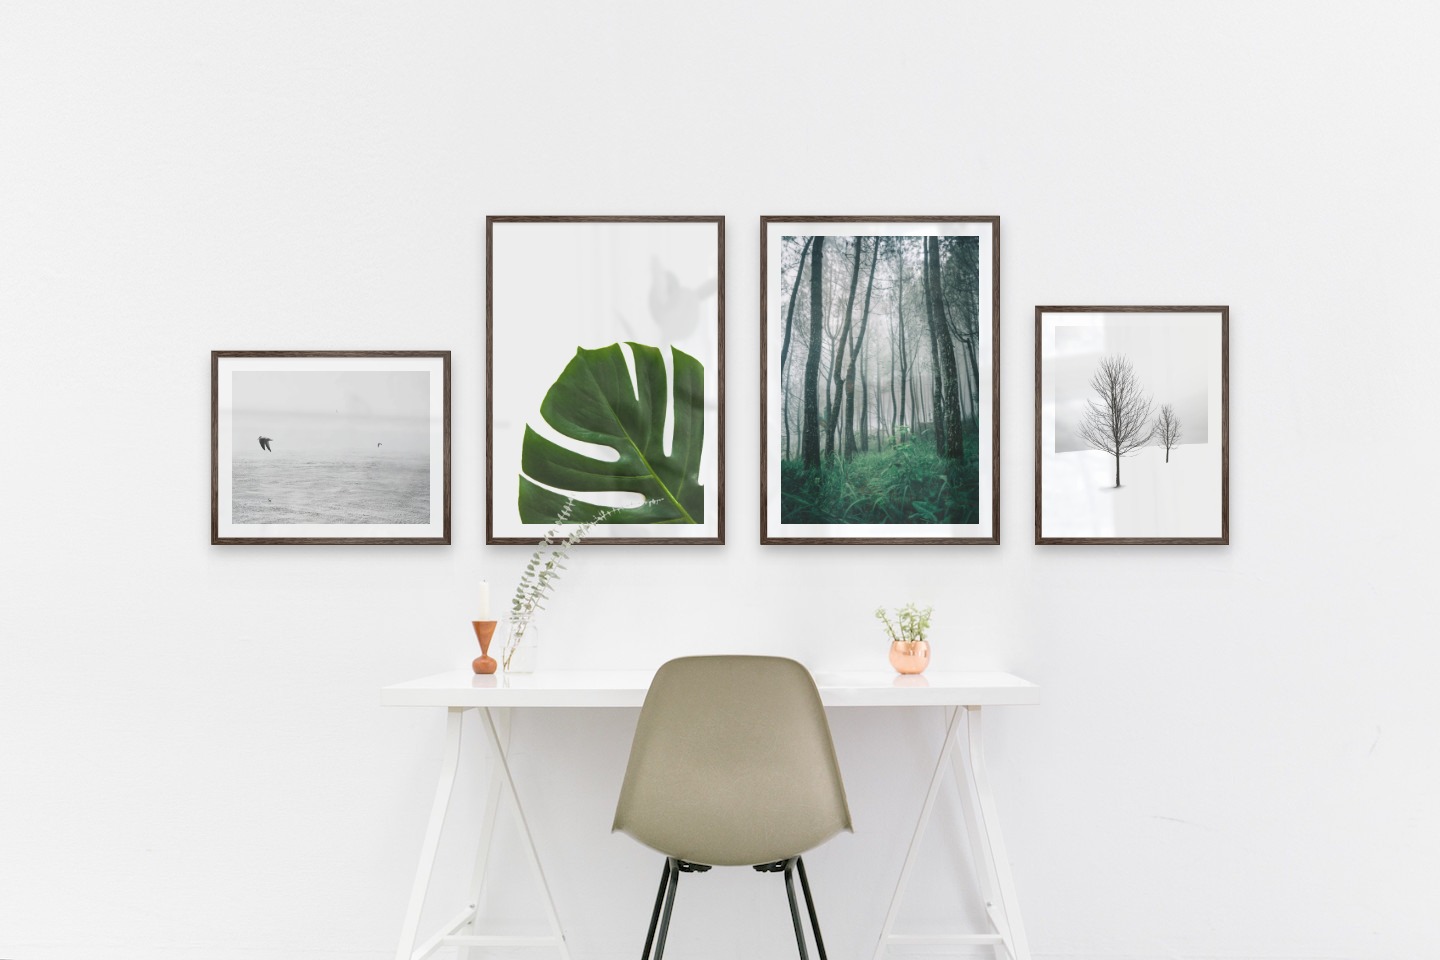 Gallery wall with picture frames in dark wood in sizes 40x50 and 50x70 with prints "Birds over the sea", "Plant", "Tall trees" and "Trees in the snow"